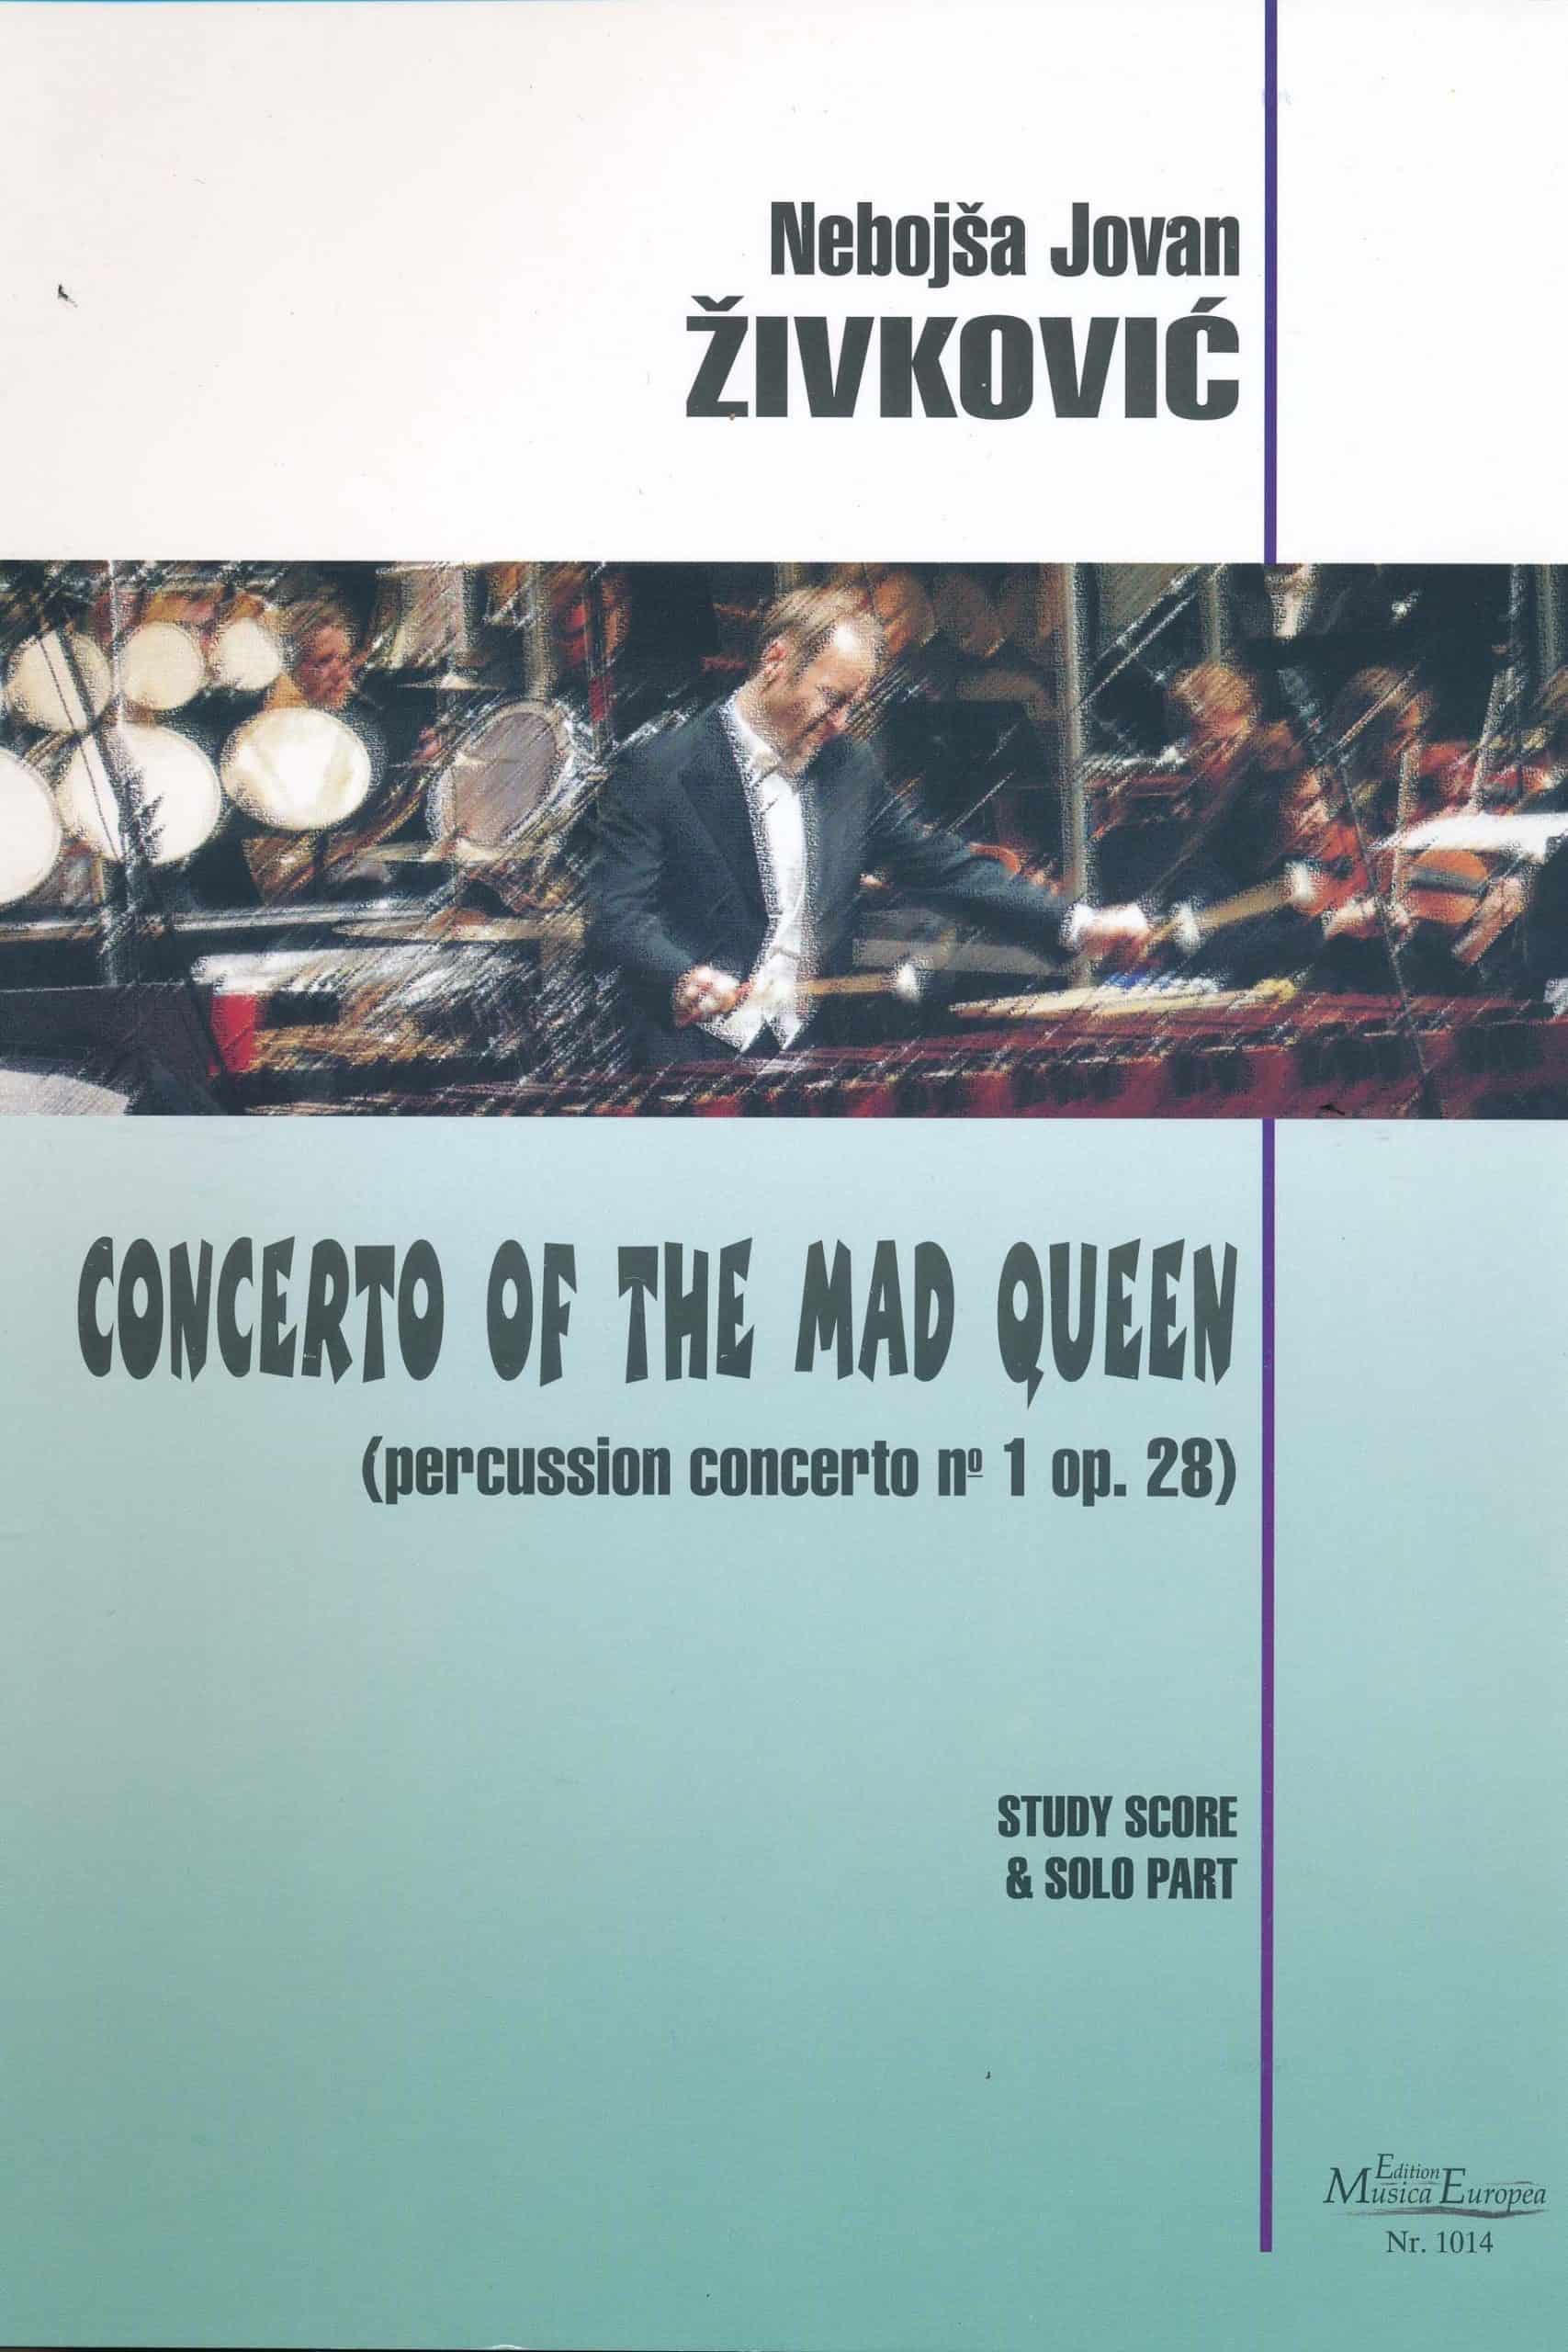 Concerto Of The Mad Queen (solo part and score) by Nebojsa Zivkovic